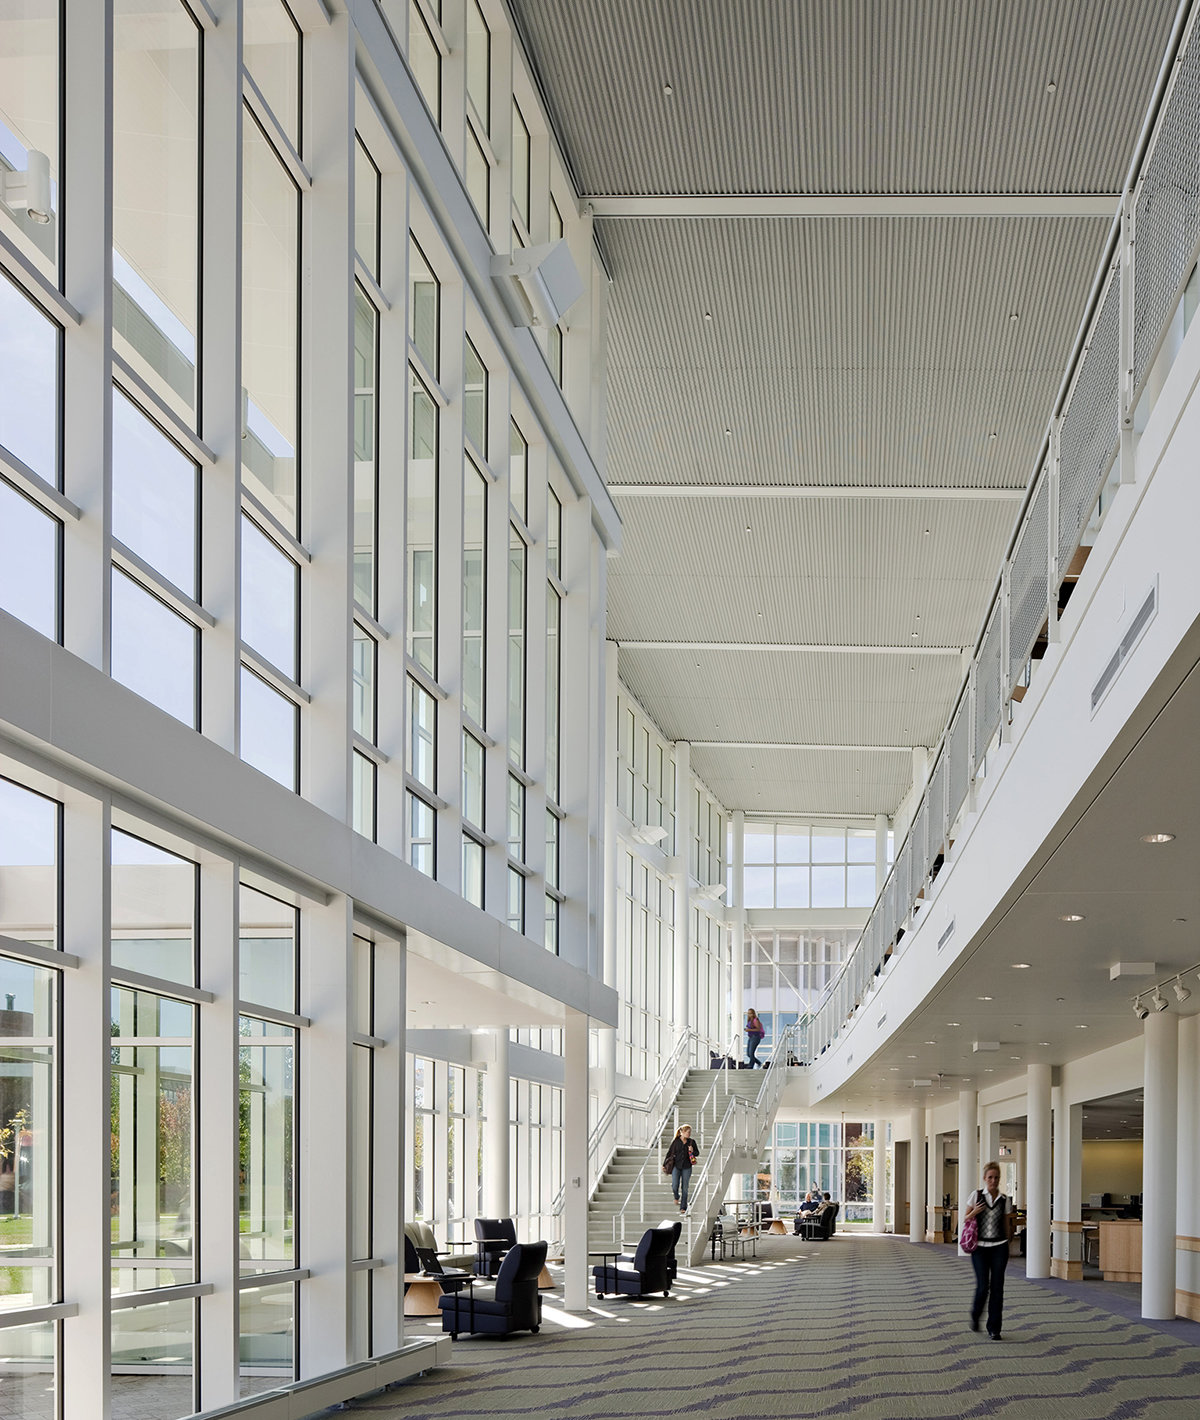 6 tskp manchester community college great path academy interior central hall view of stairs windows ceiling height 1400 0x280x1200x1420 q85